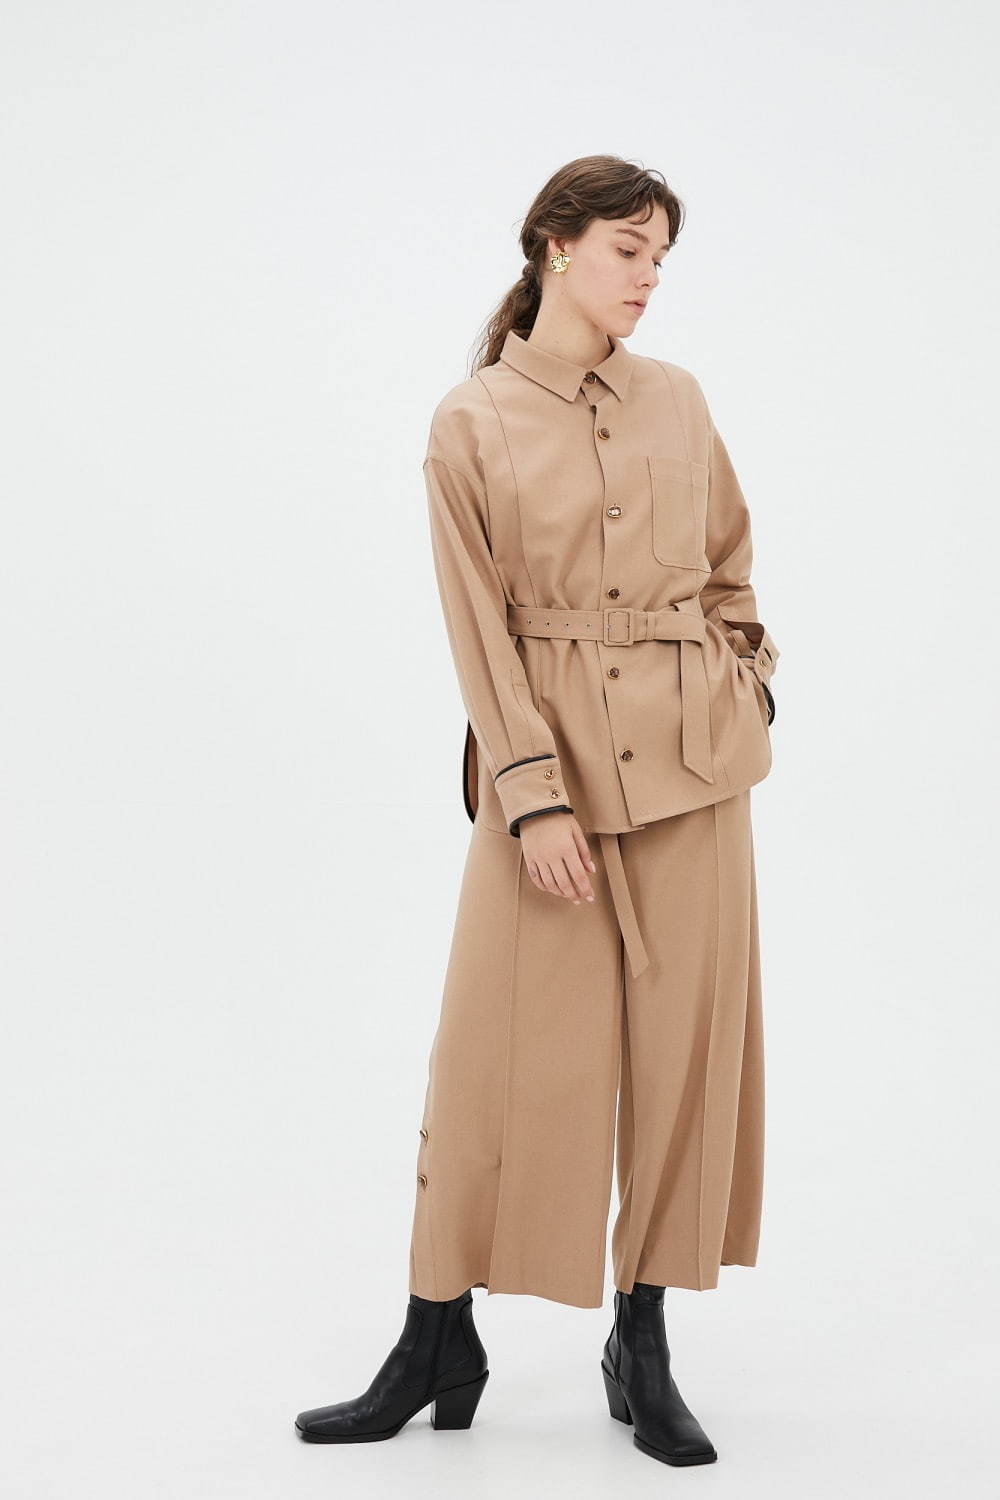 oversized shirt with antique shell buttons 29,700円、 wide trousers with antique shell buttons 27,500円(いずれも税込)